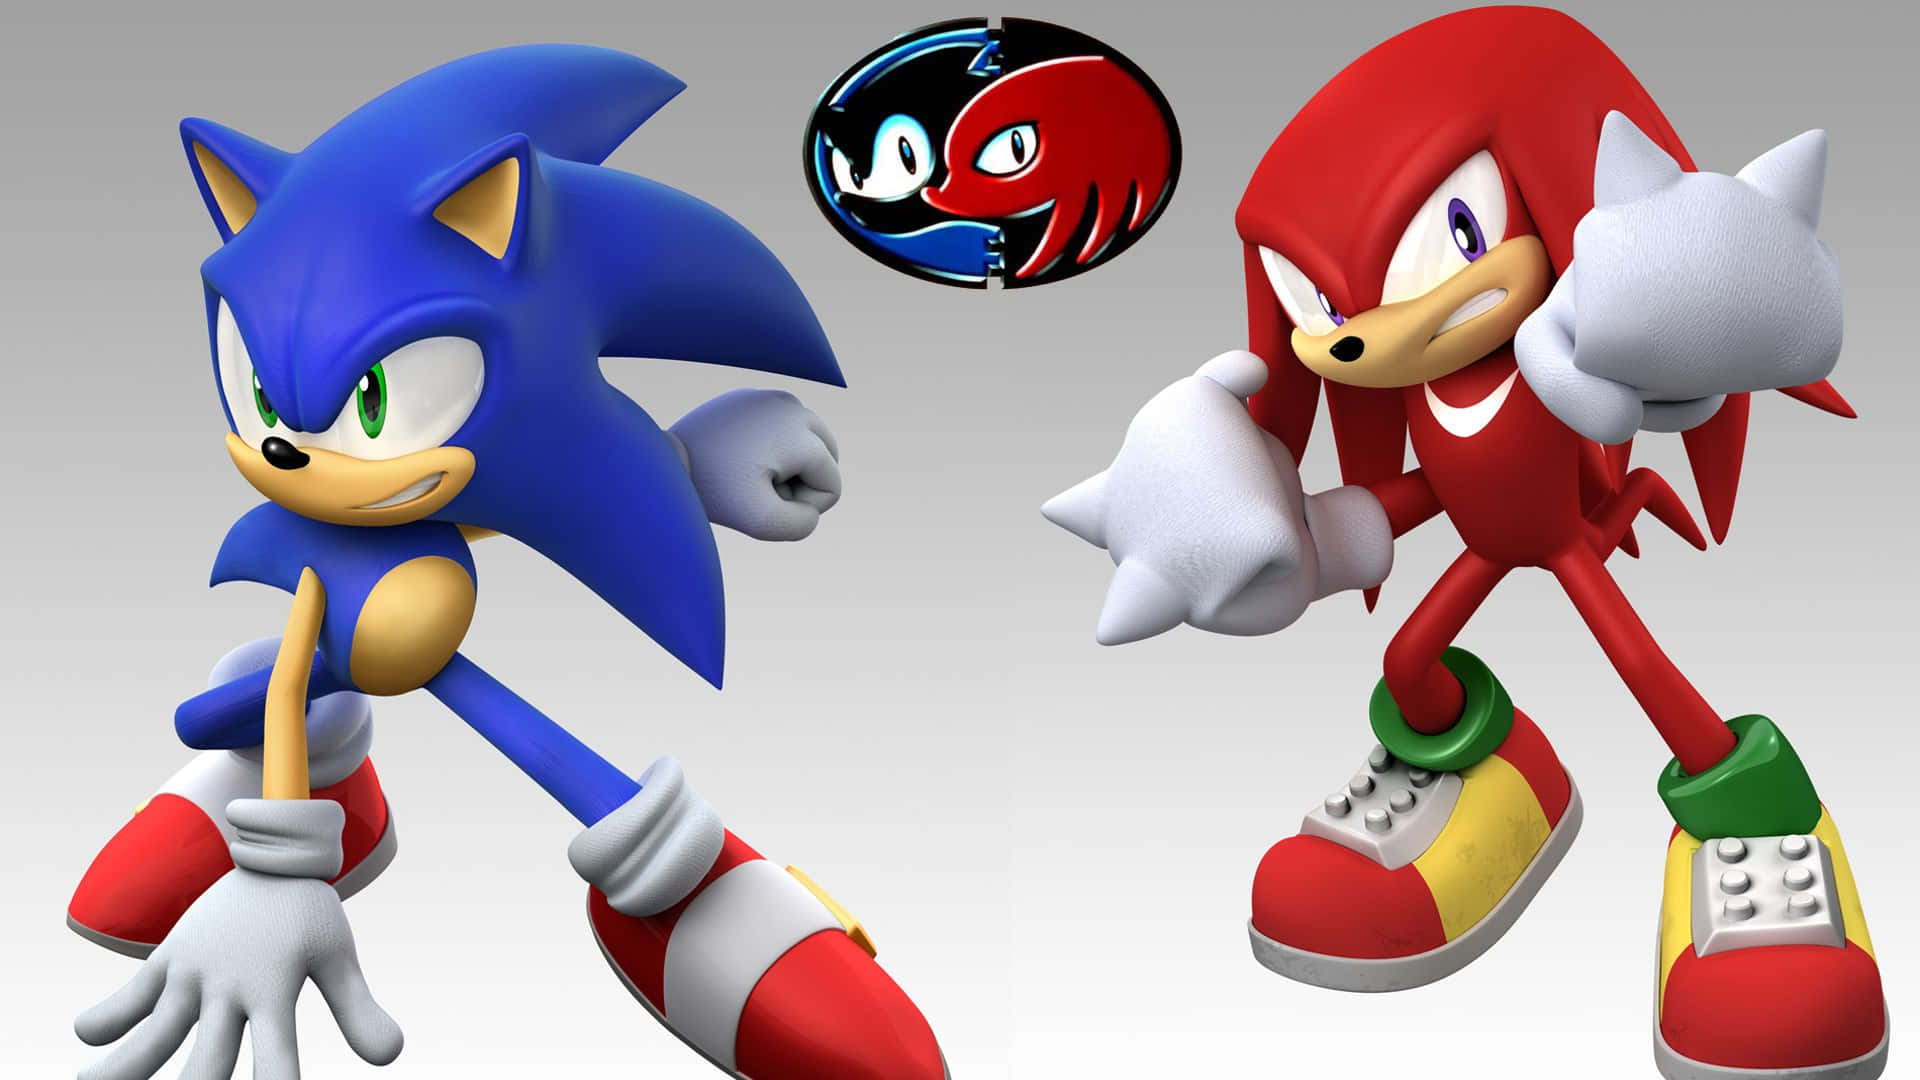 Knuckles from Sonic the Hedgehog fame Wallpaper